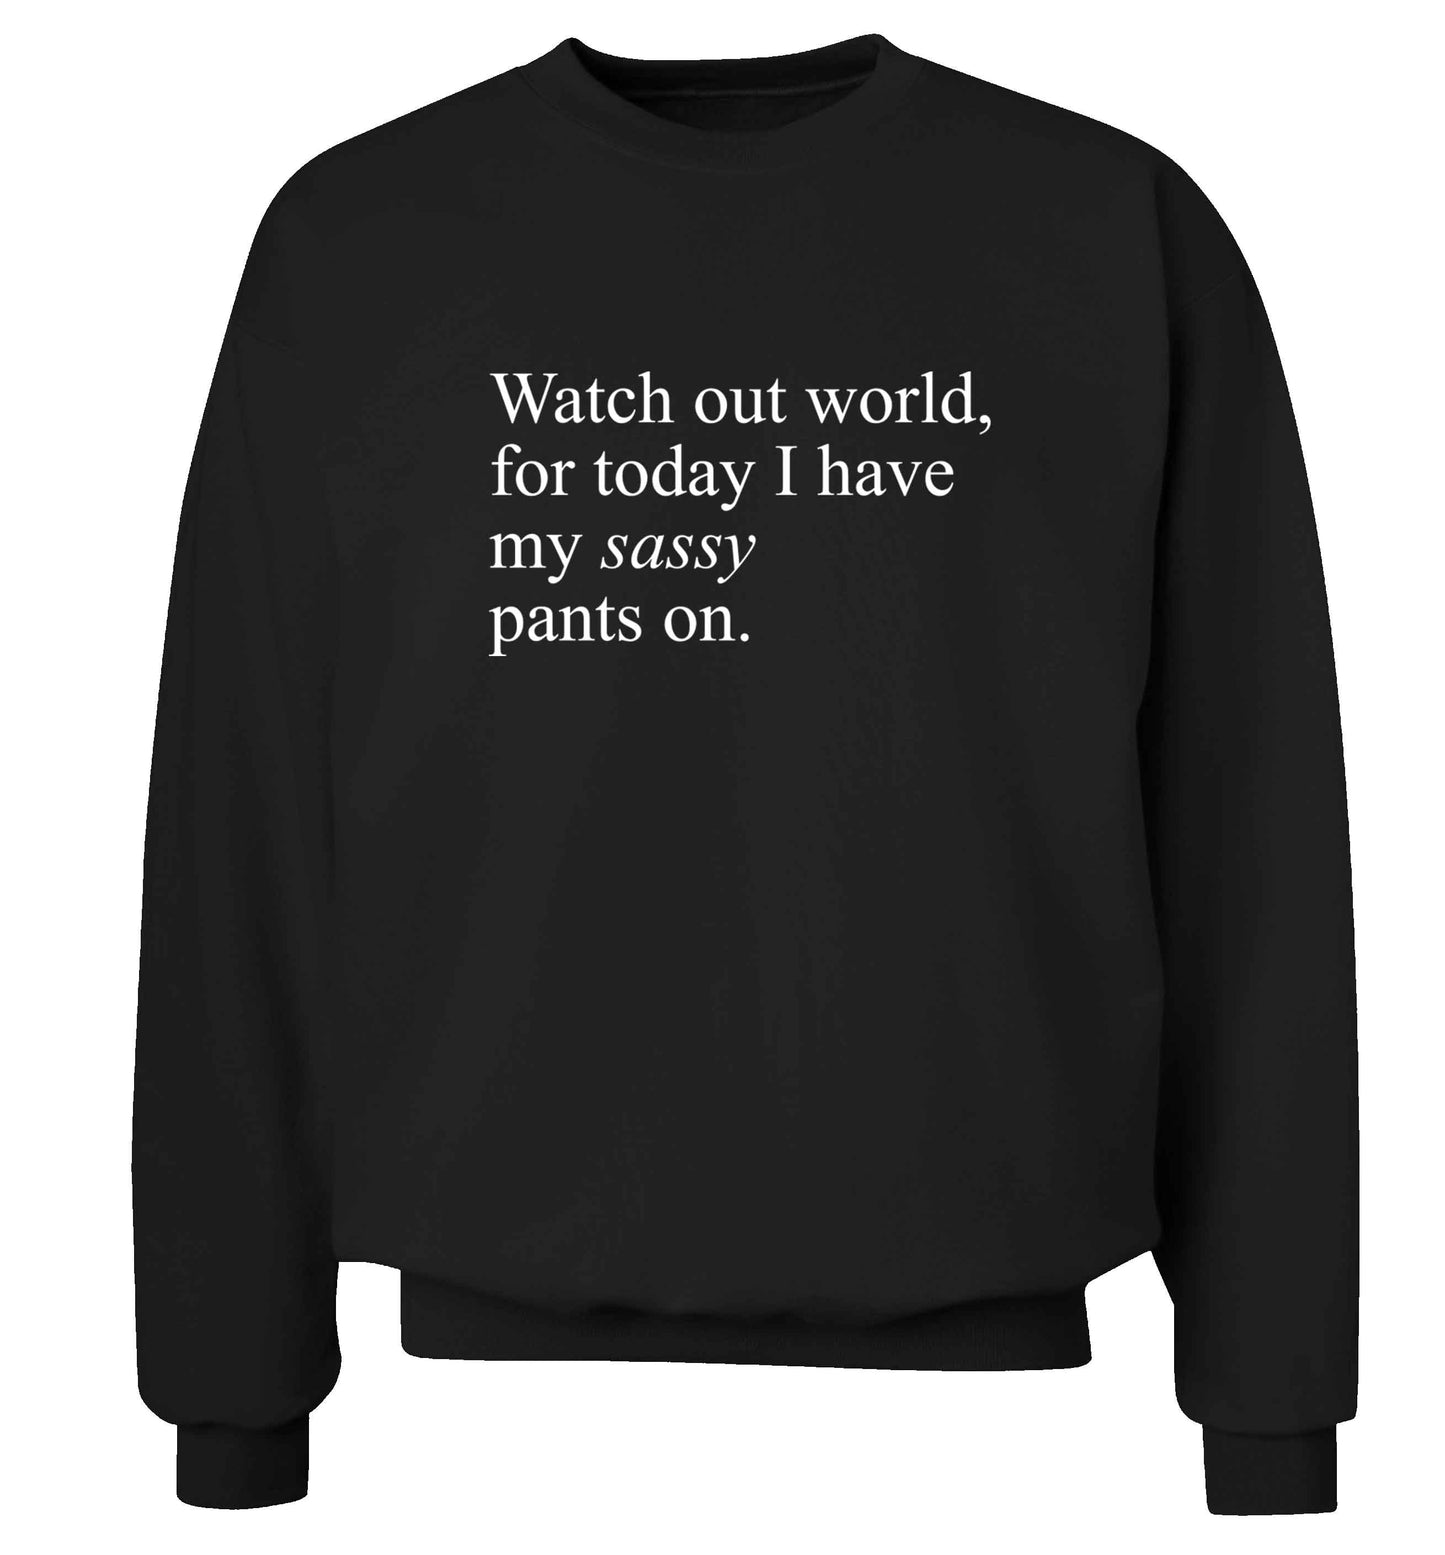 Watch out world for today I have my sassy pants on adult's unisex black sweater 2XL